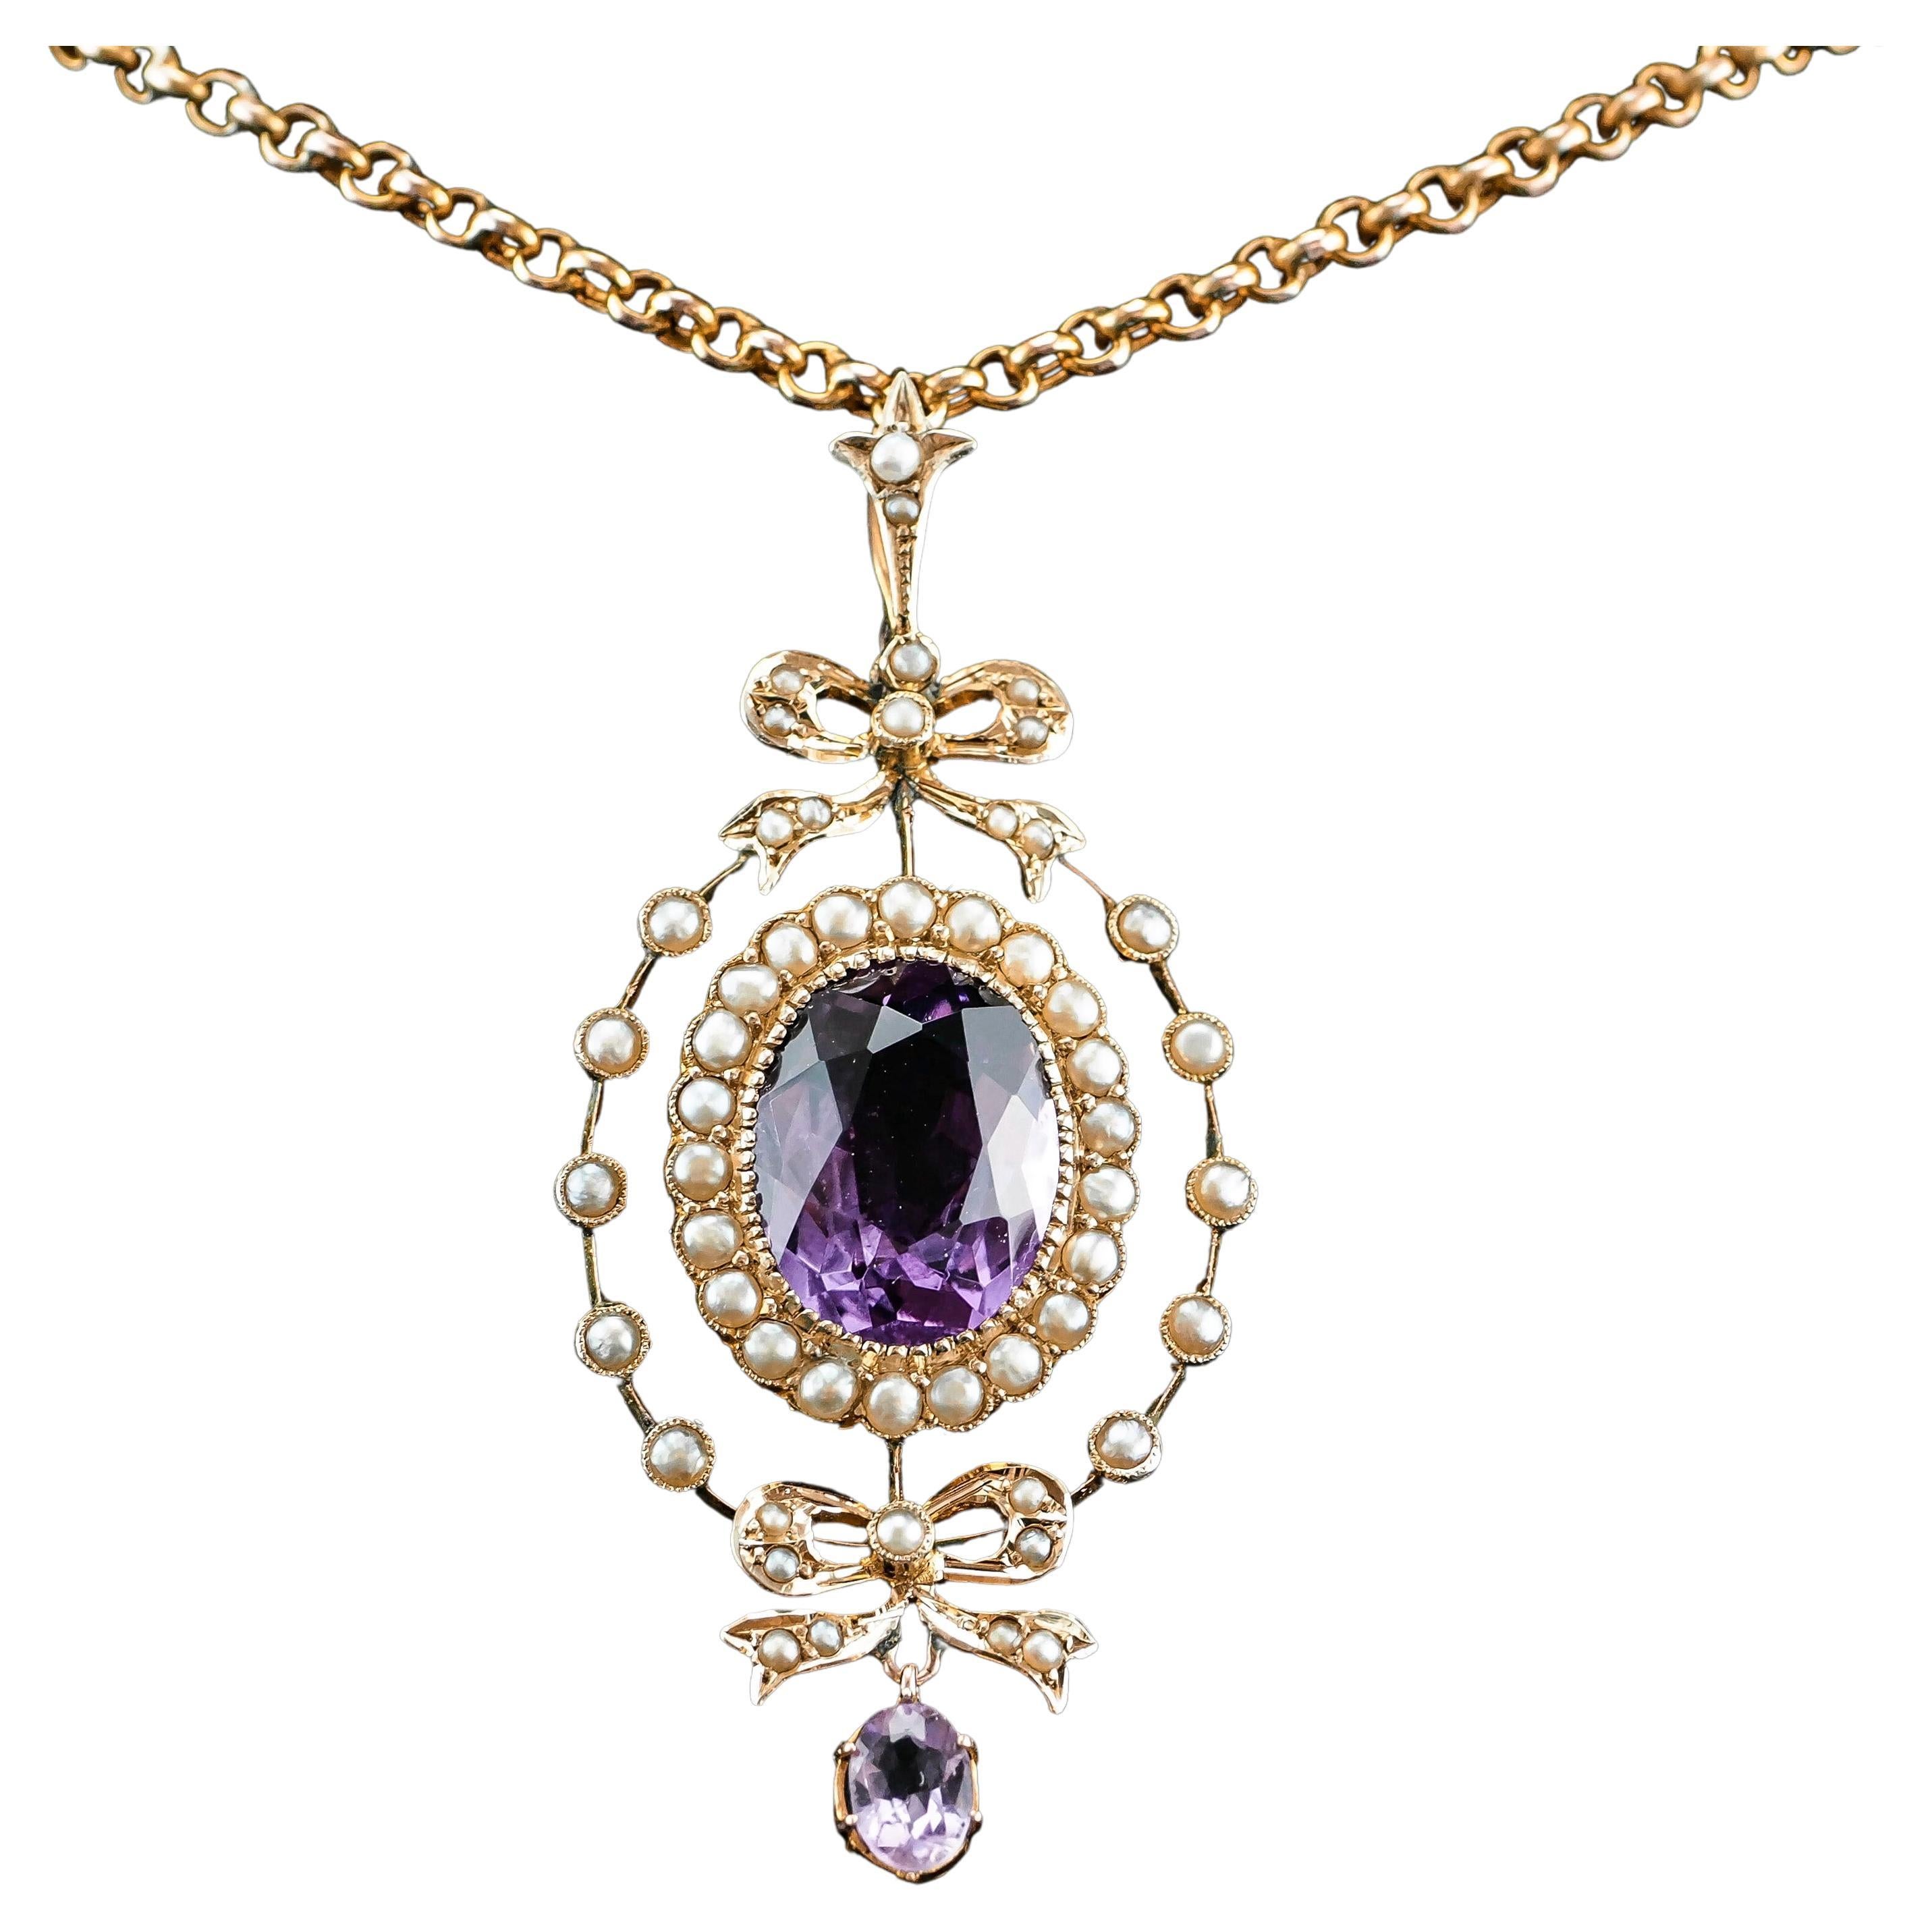 Antique Edwardian Amethyst & Seed Pearl 9k Gold Necklace Pendant, circa 1905